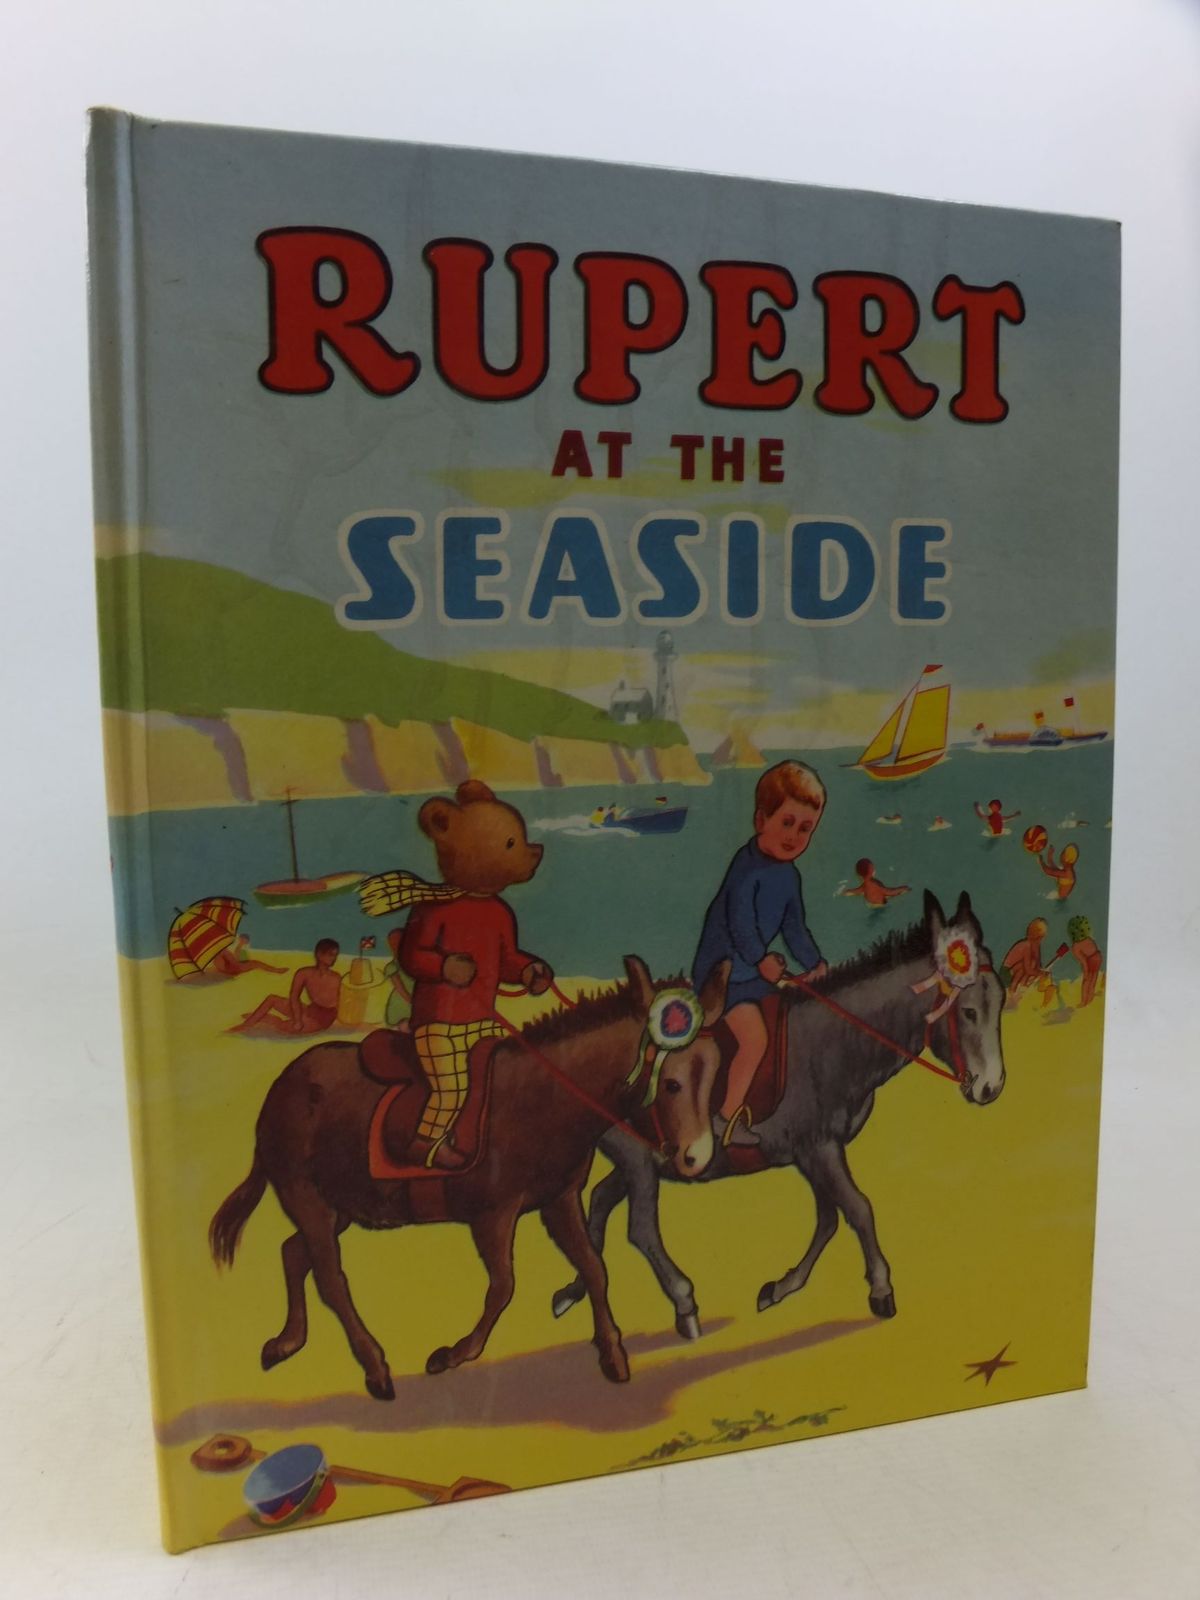 Photo of RUPERT AT THE SEASIDE published by L.T.A Robinson (STOCK CODE: 1109215)  for sale by Stella & Rose's Books